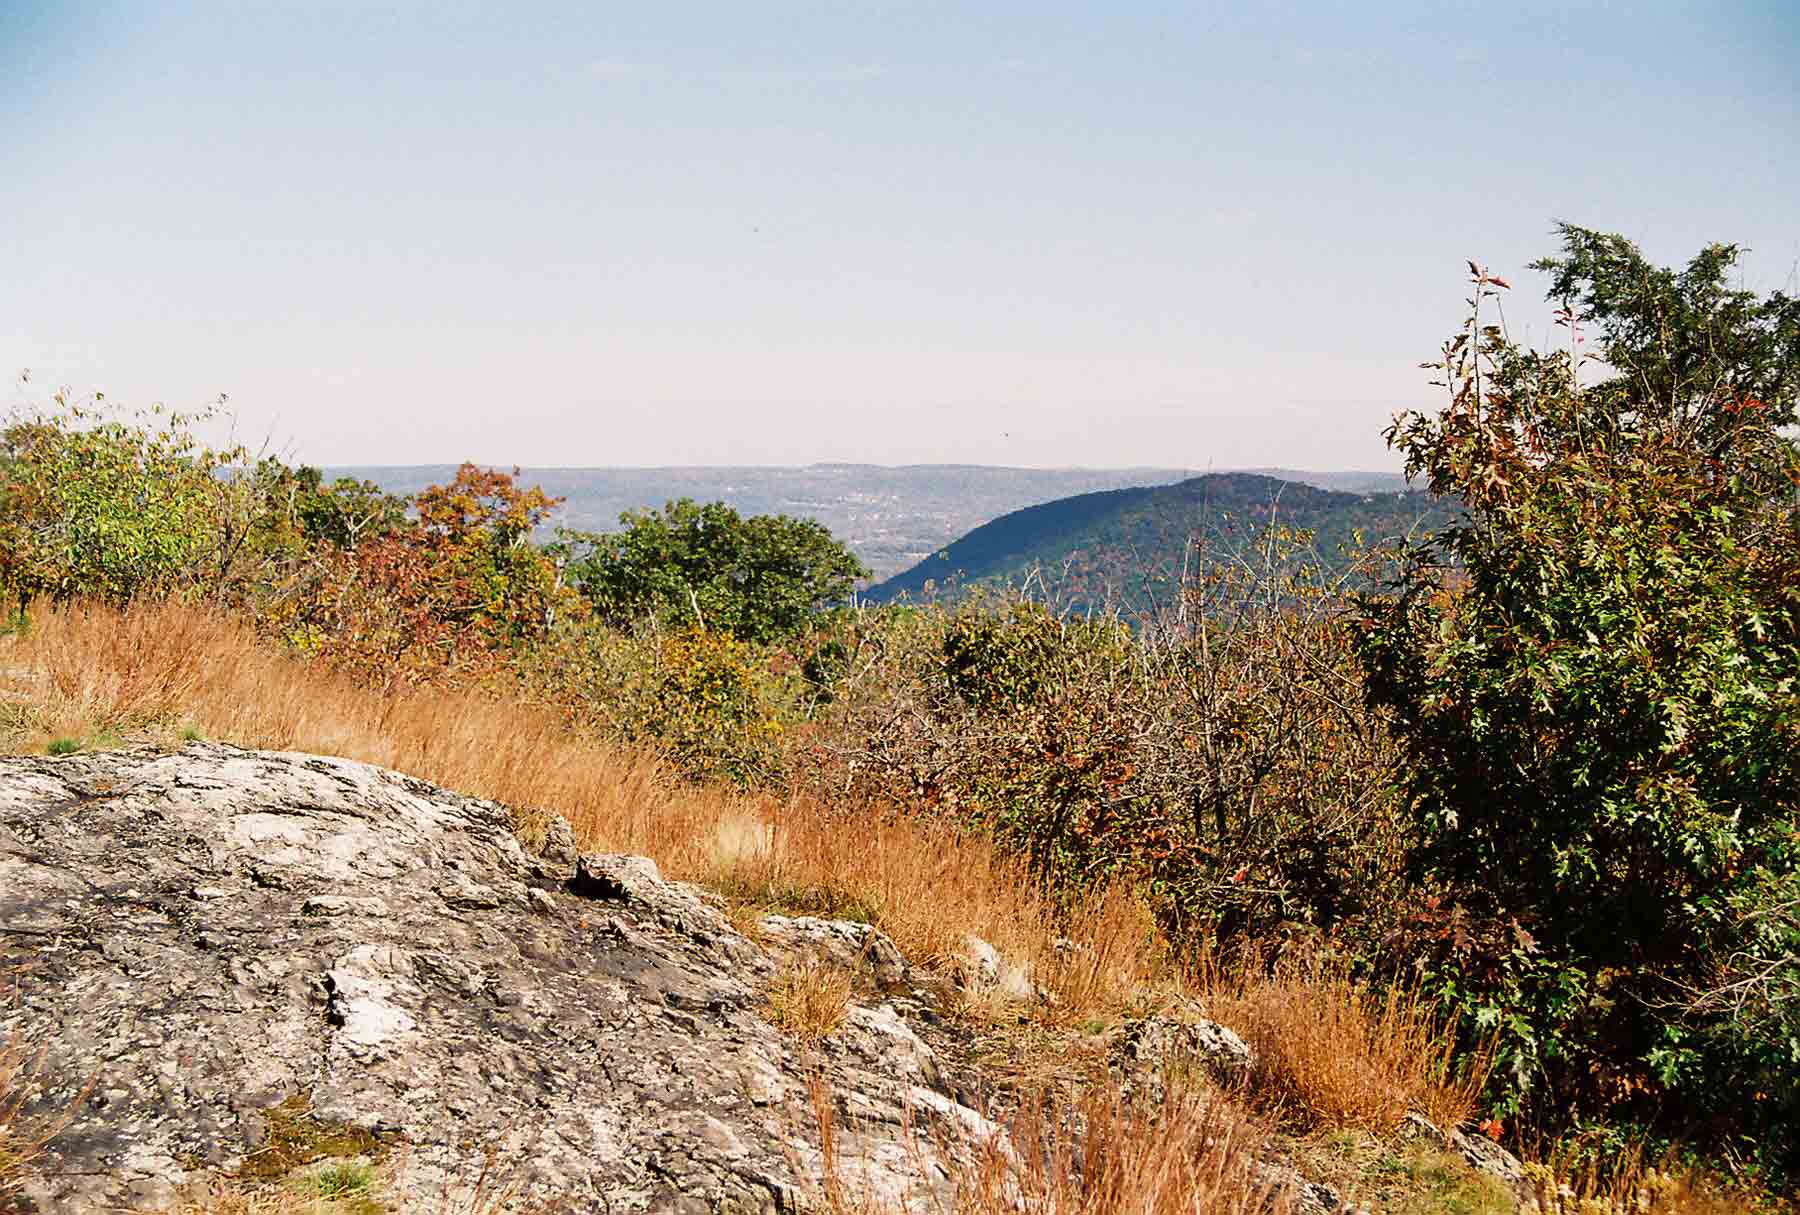 mm 3.1 - View to the northwest from the summit of Shenandoah Mt. Courtesy dlcul@conncoll.edu